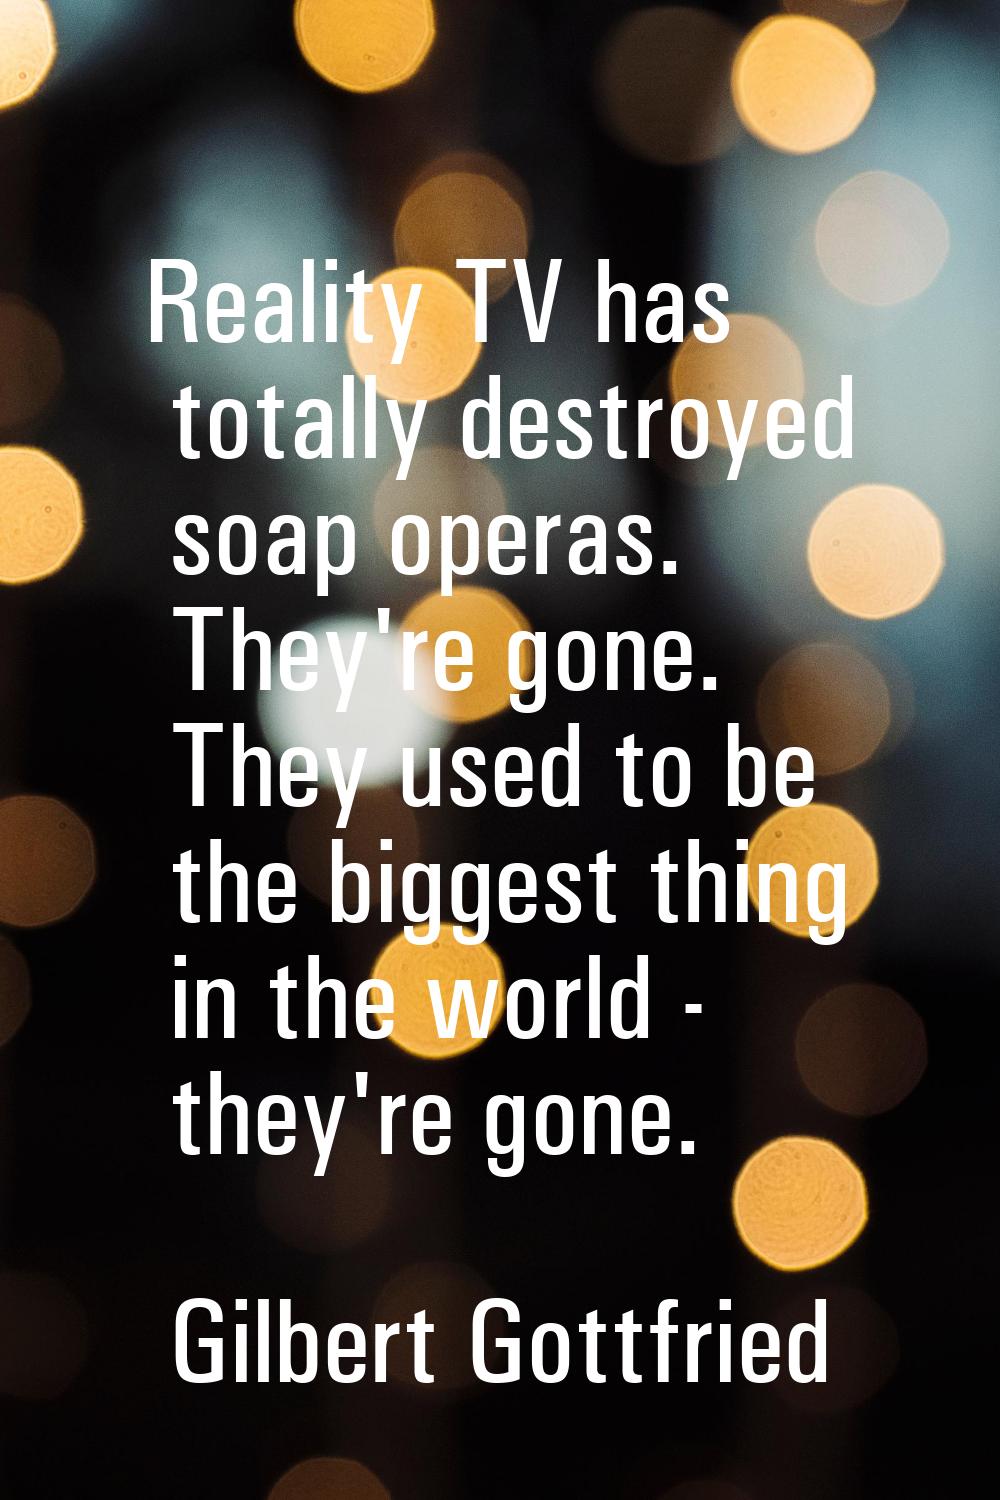 Reality TV has totally destroyed soap operas. They're gone. They used to be the biggest thing in th